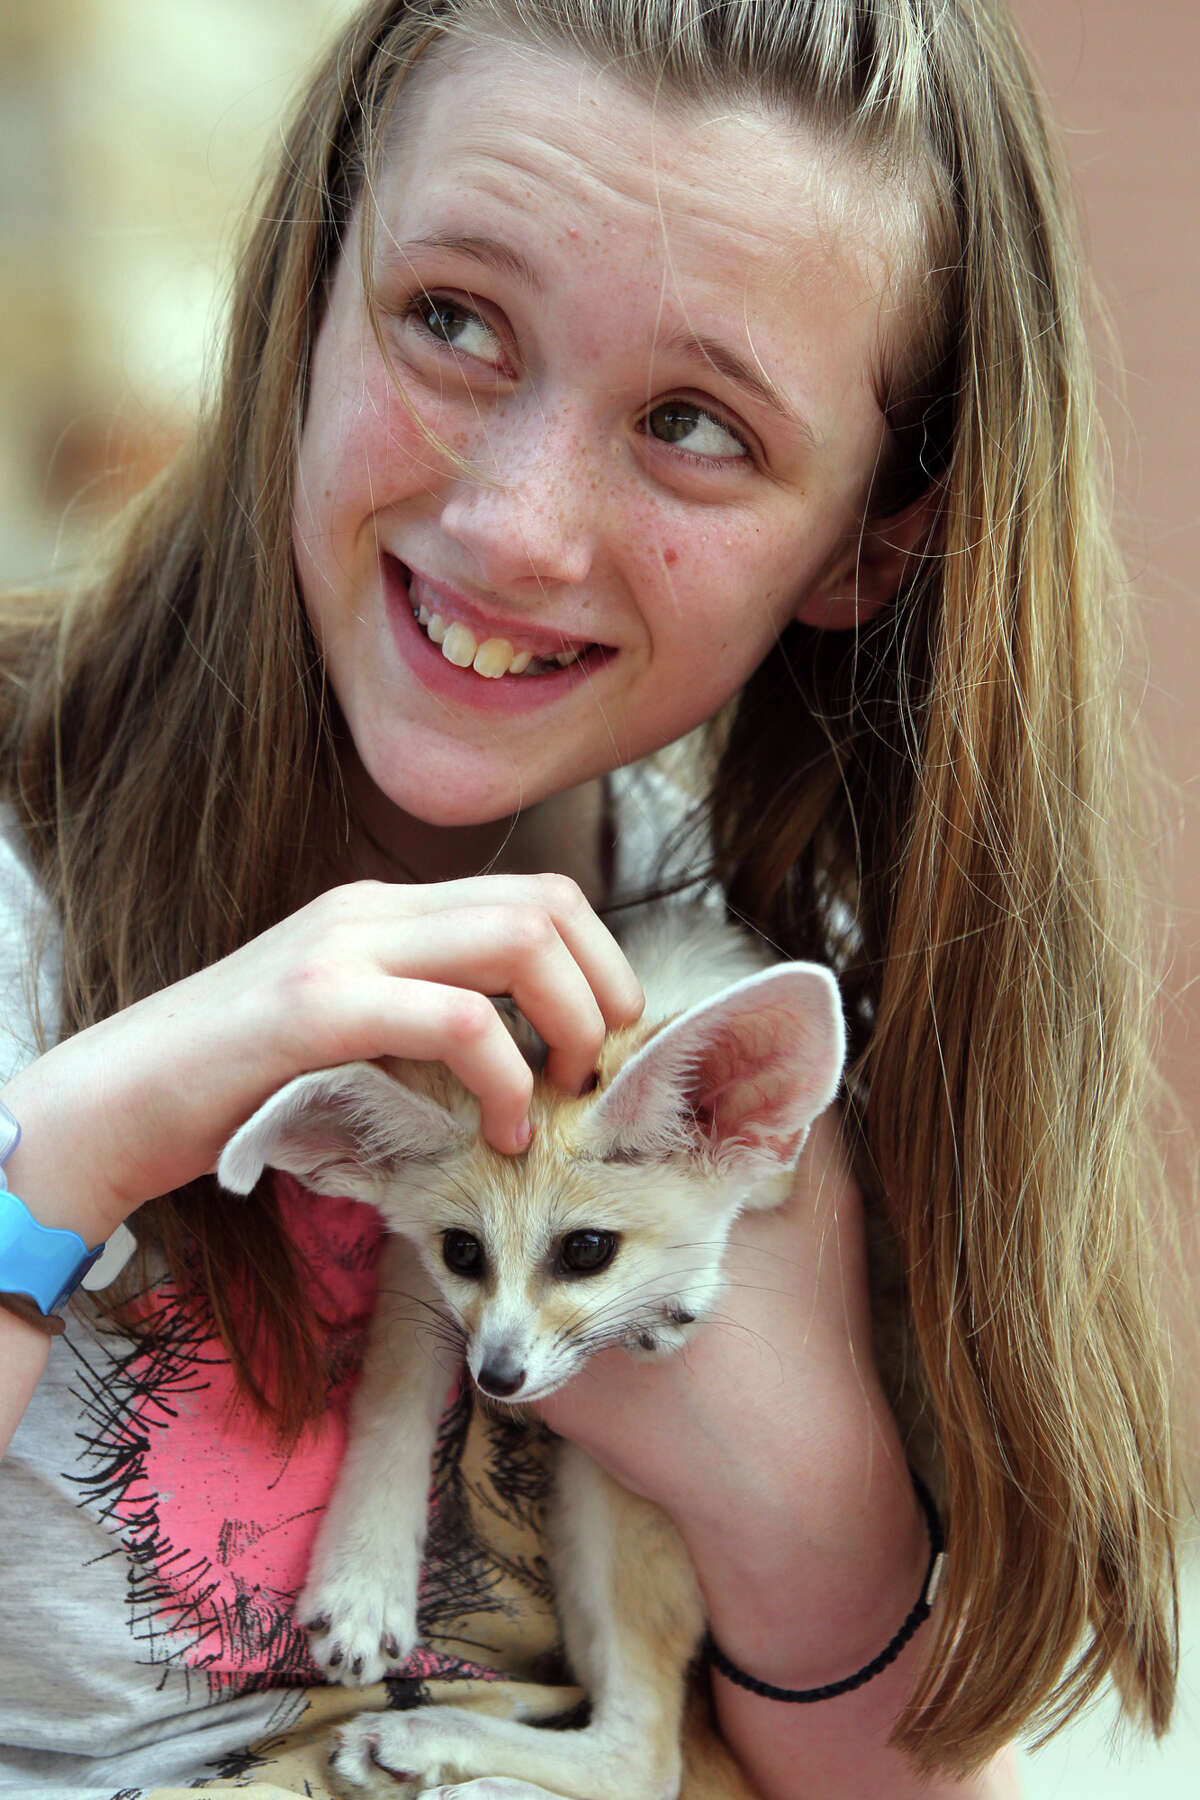 Abbey Paulson,12, cuddles with a fennec fox Wednesday June 20, 2012 at Morgan's Wonderland during a special presentation by the Zoofari Animal Show. The fennec fox is a small nocturnal fox found in north Africa with large ears that help it dissipate heat. Click to browse all of the EN's most memorable photos of 2012